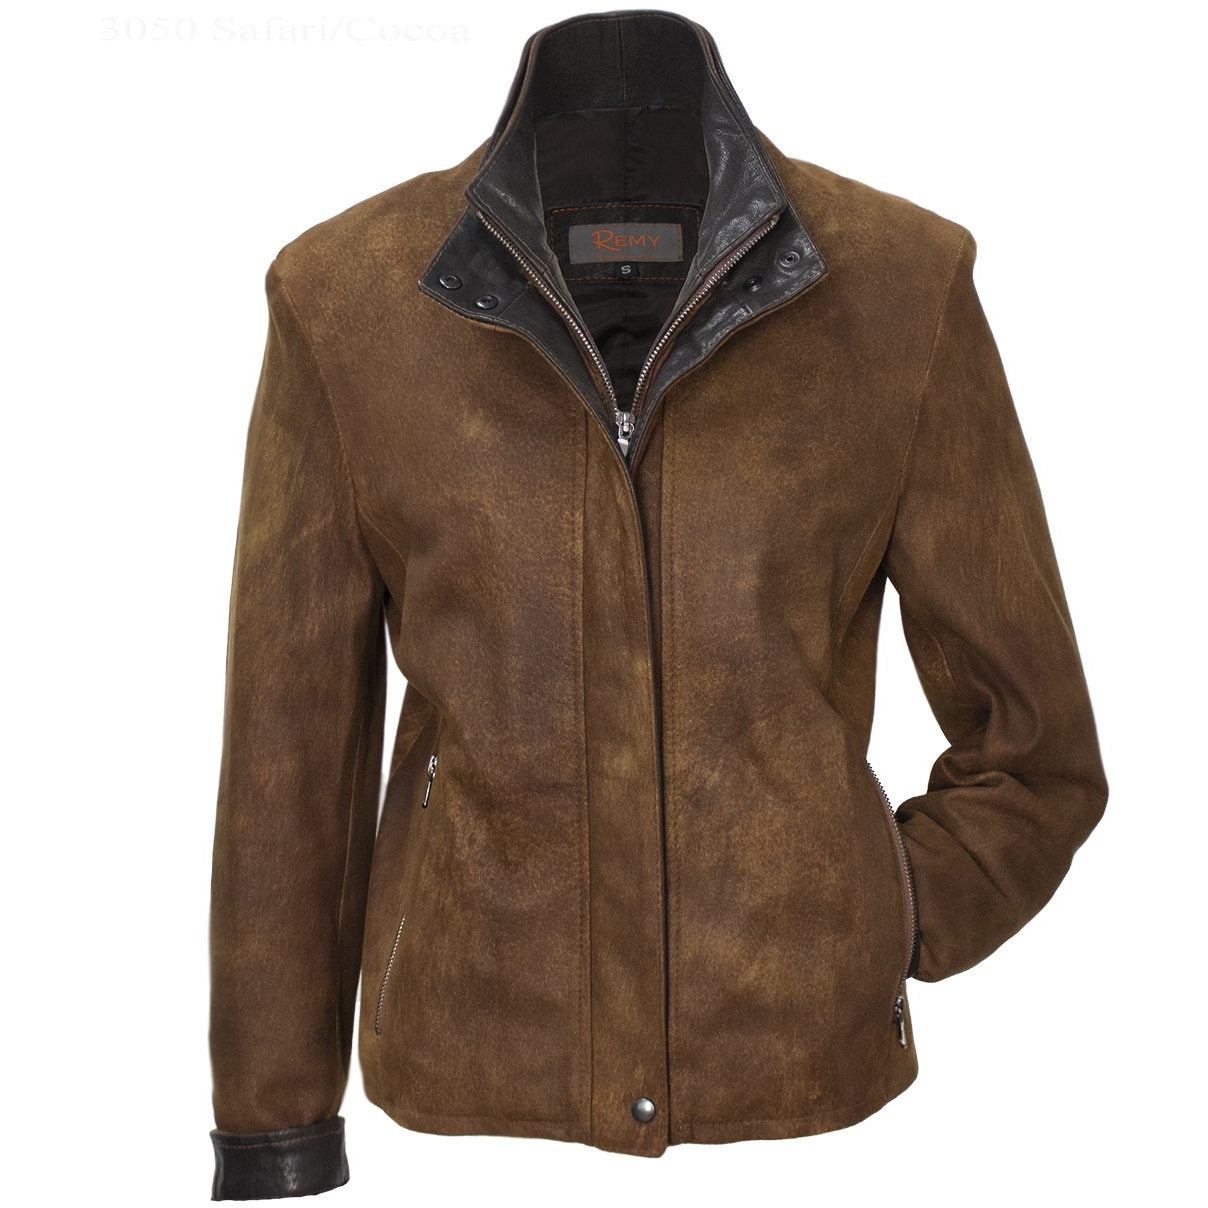 3050 - Ladies Double Collar Leather Jacket in Safari/Cognac – Remy Leather